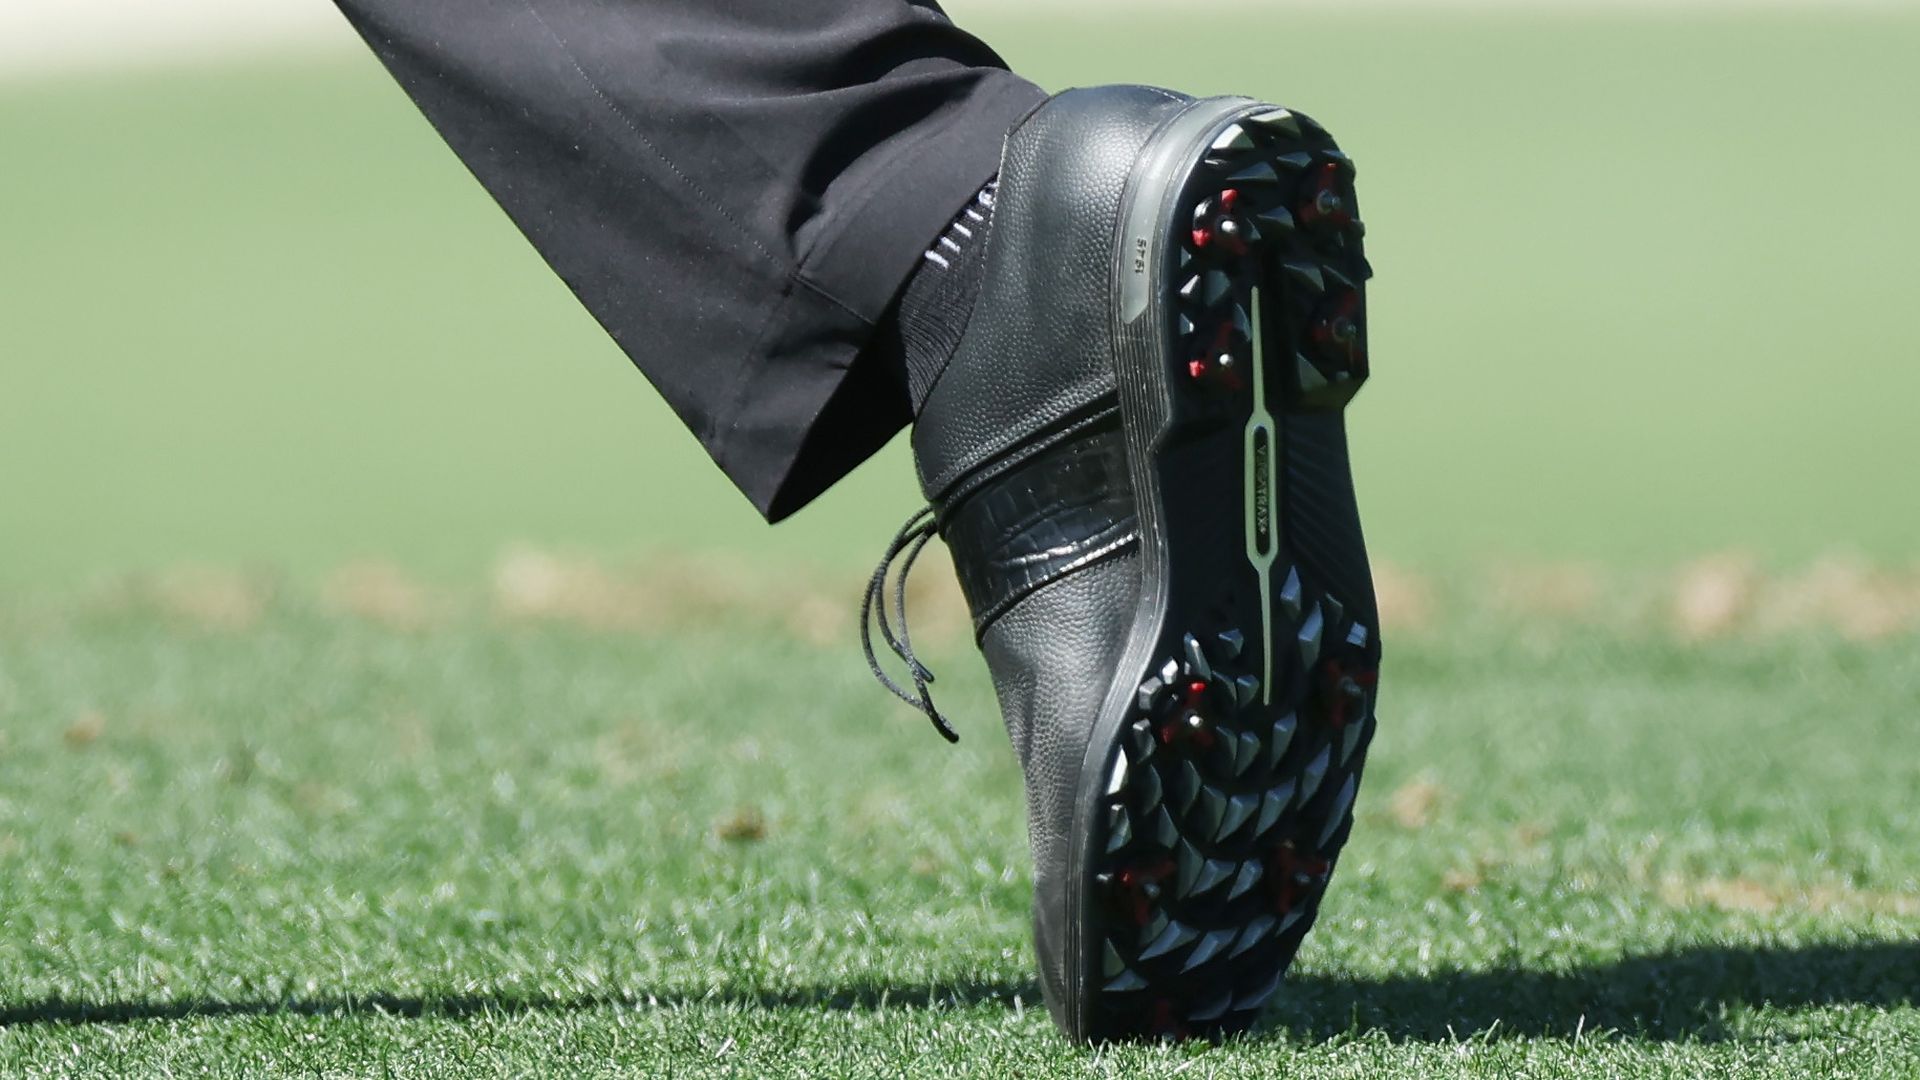 A foot in black golf shoes is pointed toward the ground